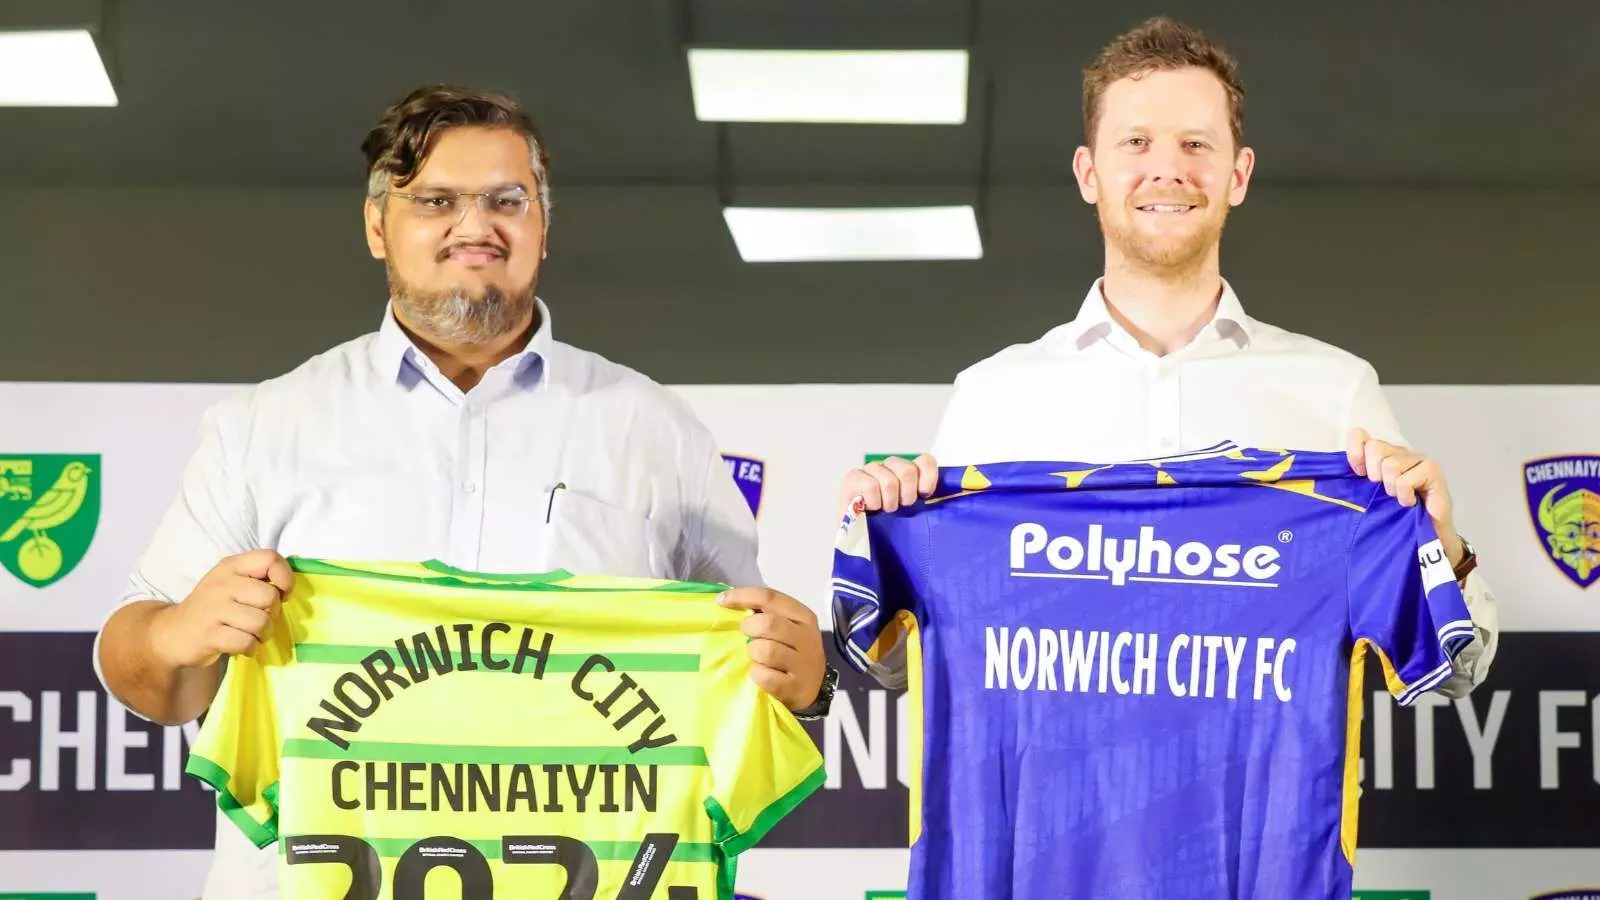 Ekansh Gupta, vice president of Chennaiyin FC (left) and Sam Jeffery, commercial director of Norwich City pose during the partnership announcement. PC: Chennaiyin FC